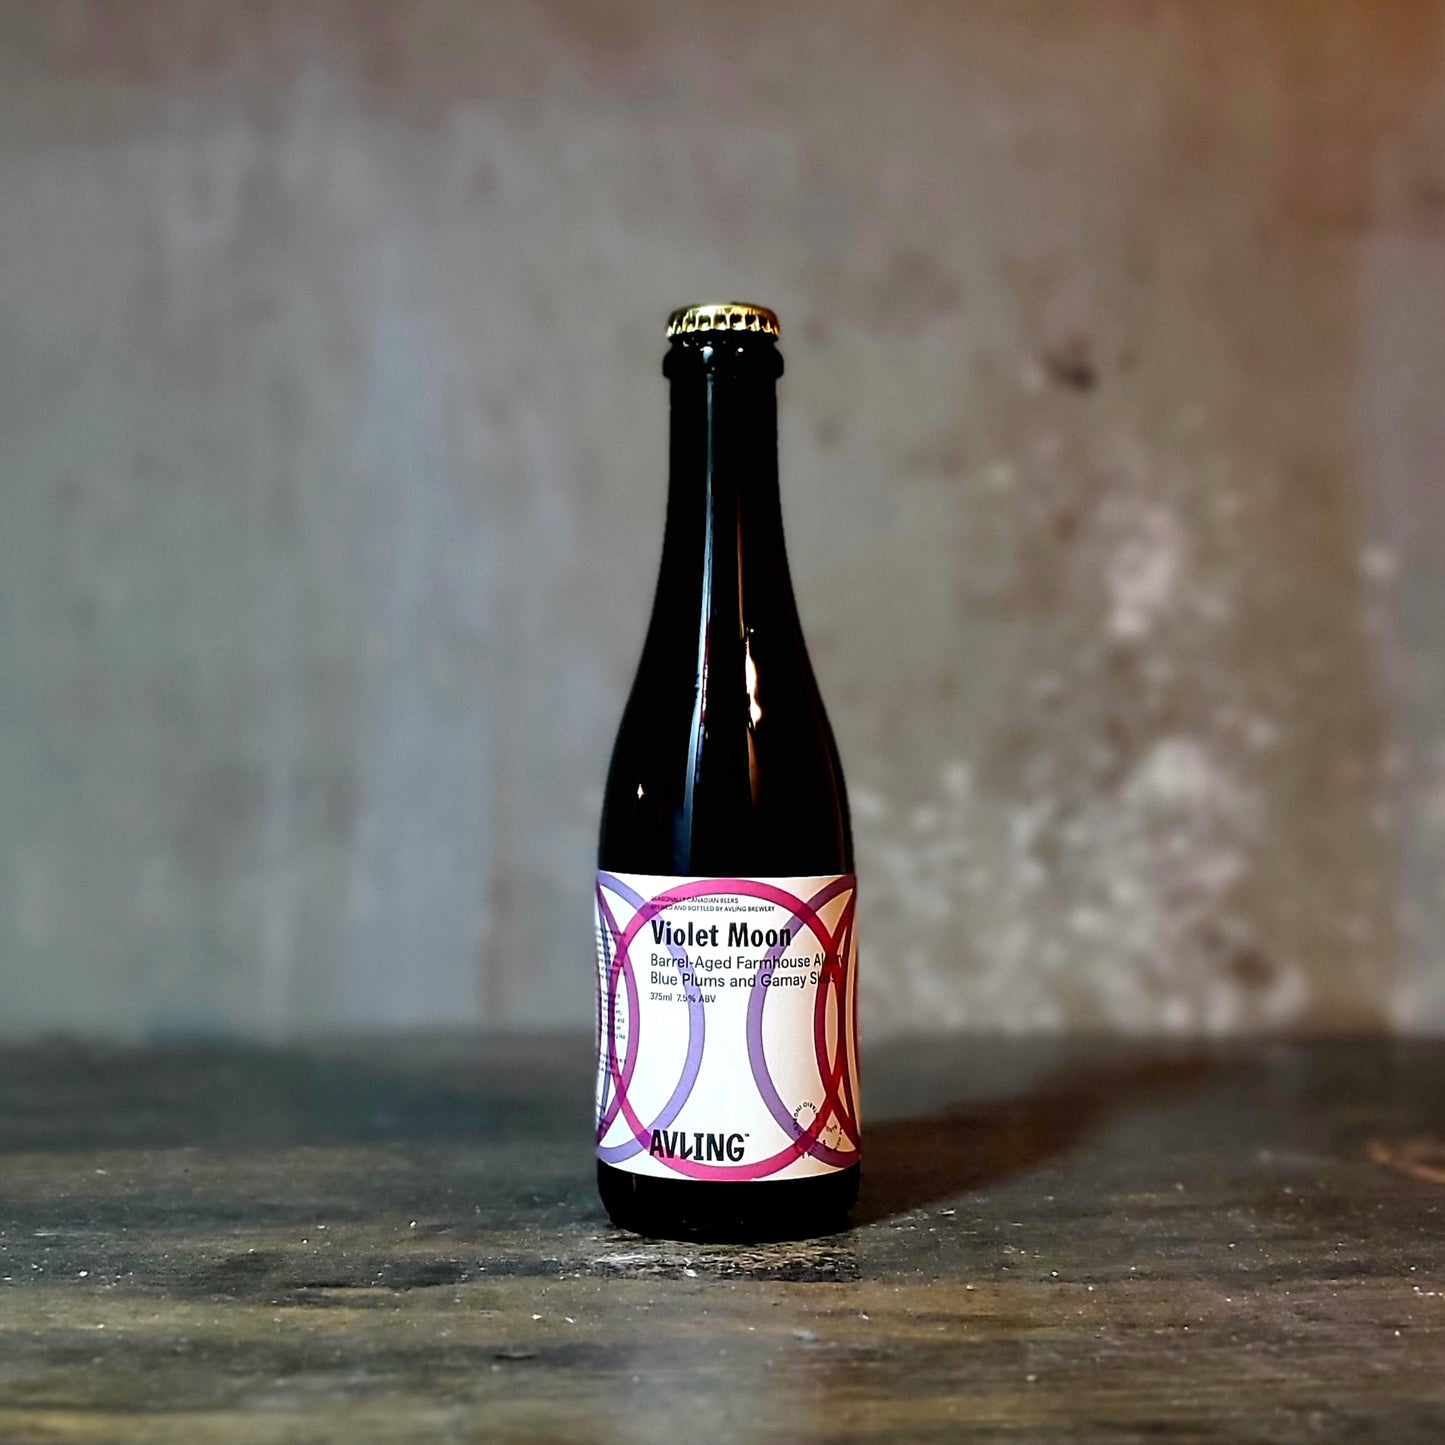 Avling "Violet Moon" Barrel-Aged Ale on Blue Plums and Gamay Skins